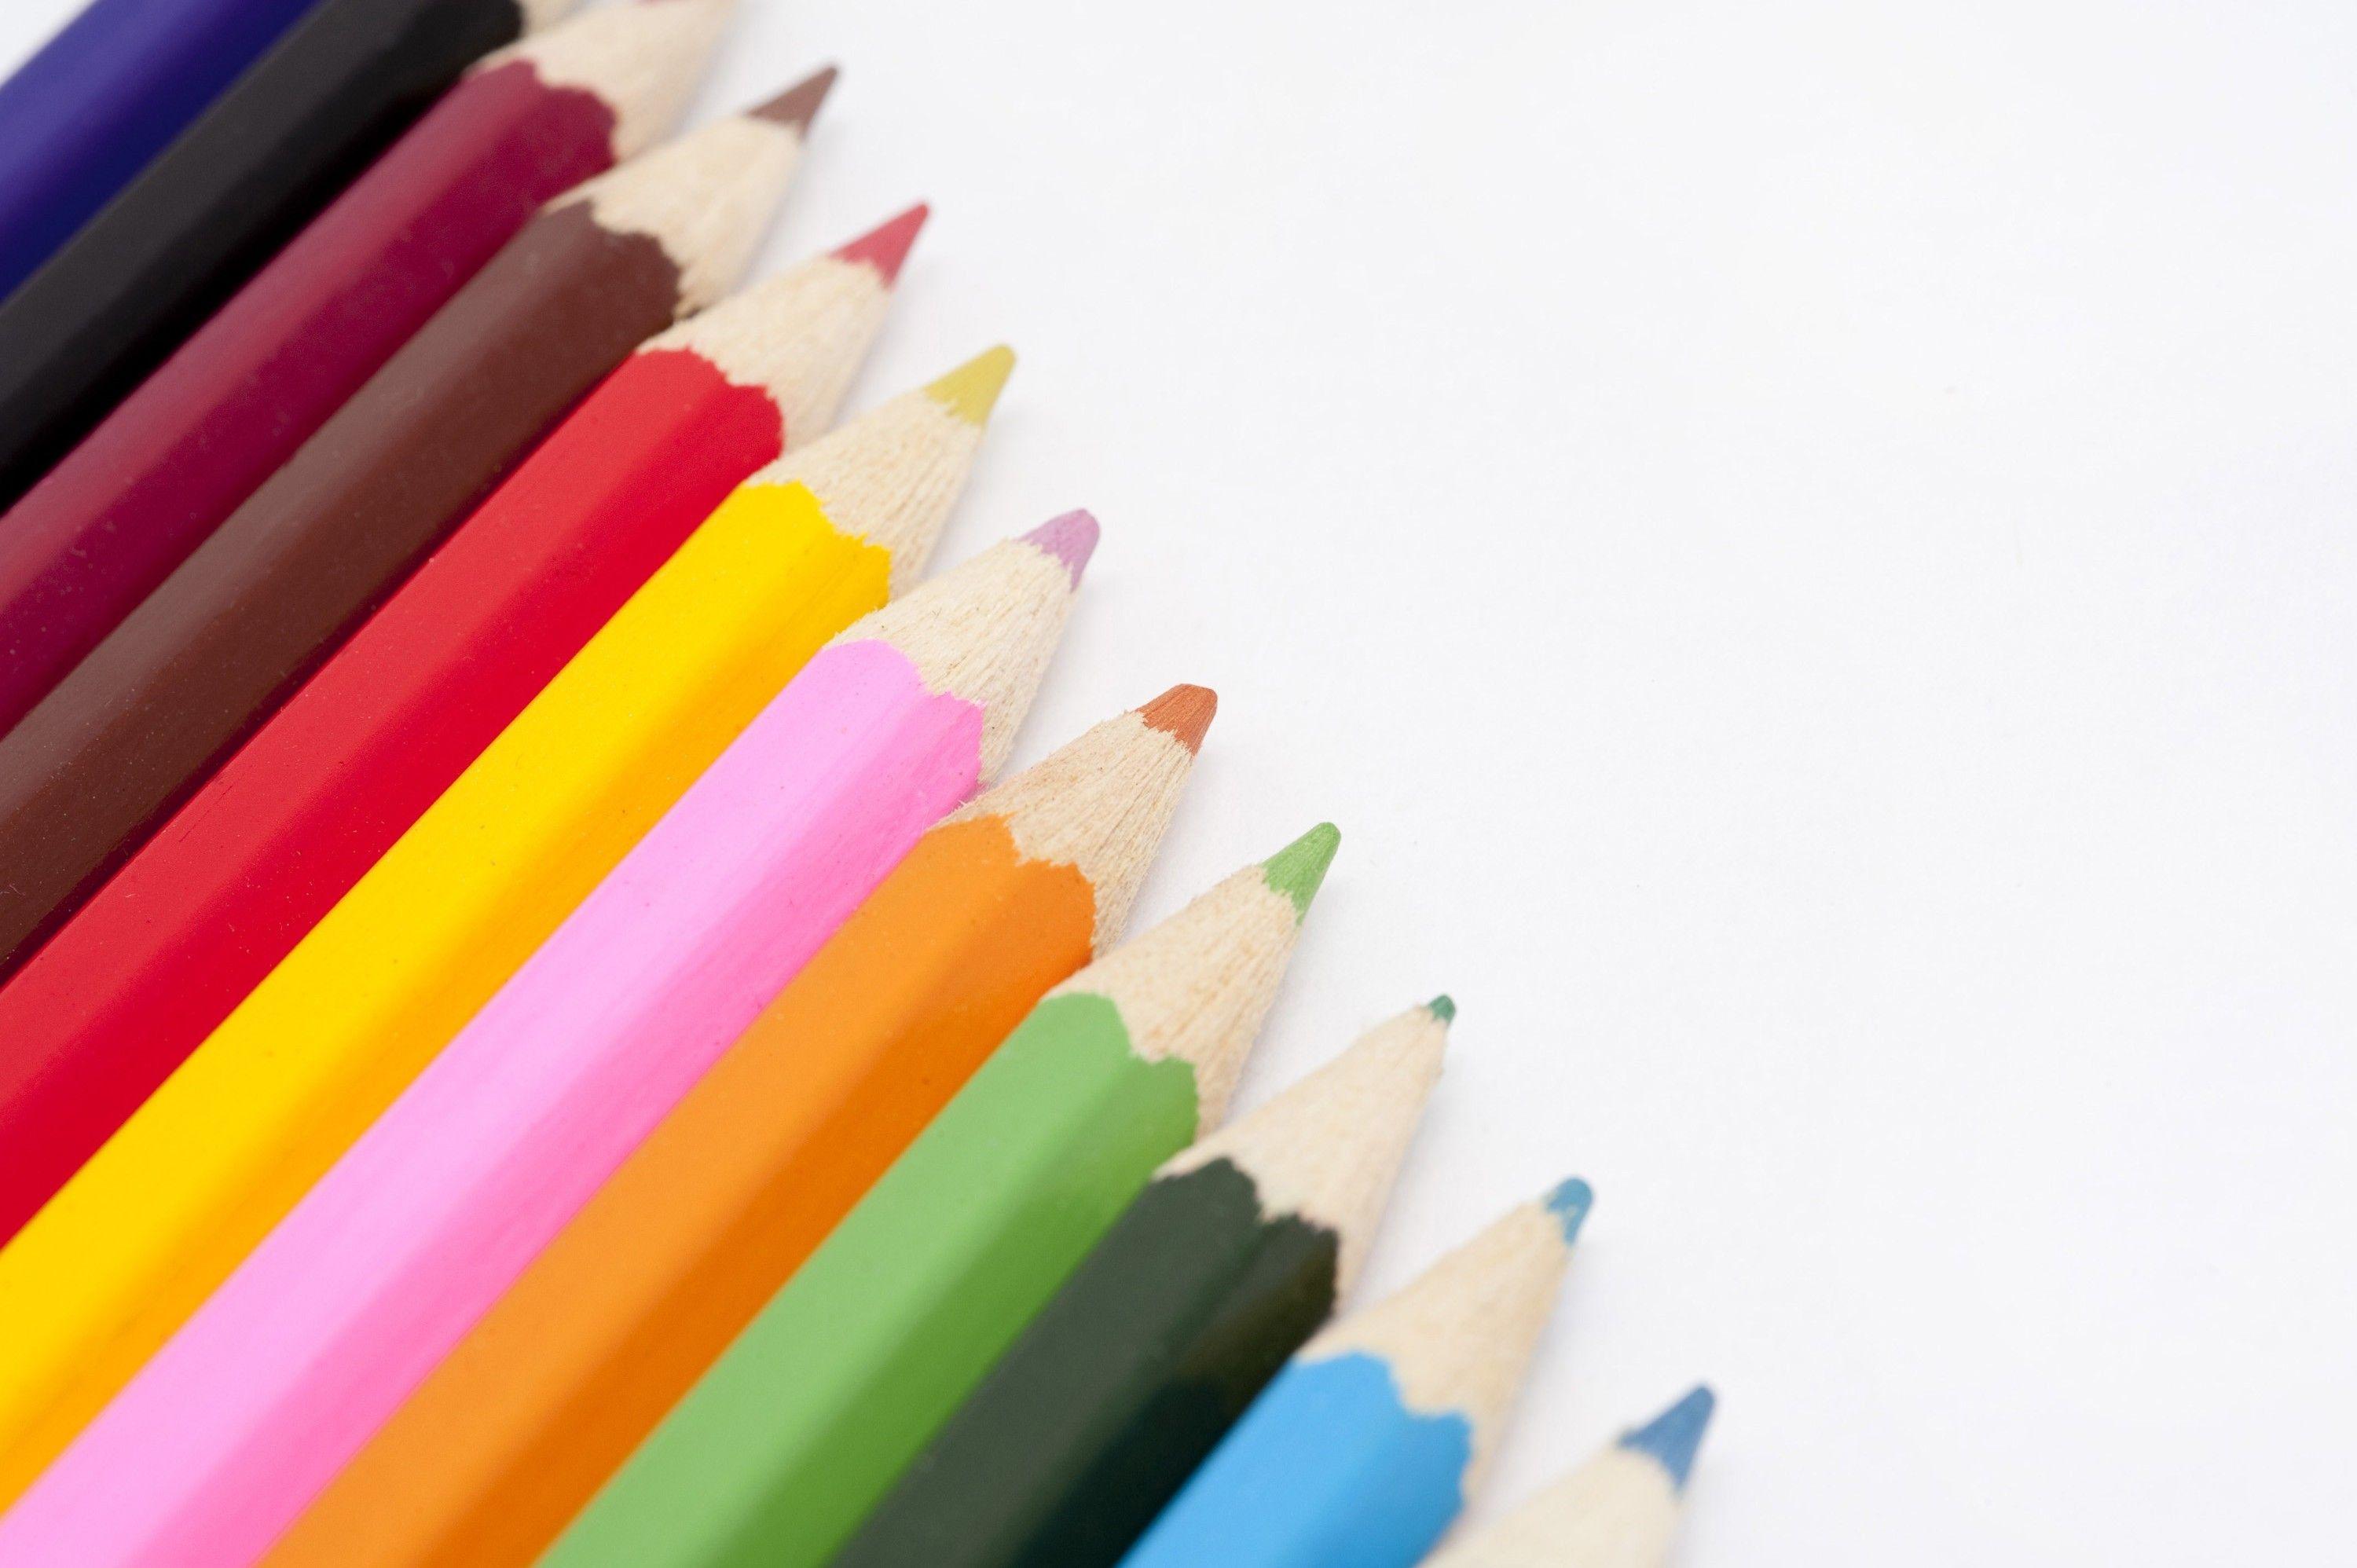 Free image of Row of coloured pencil crayons